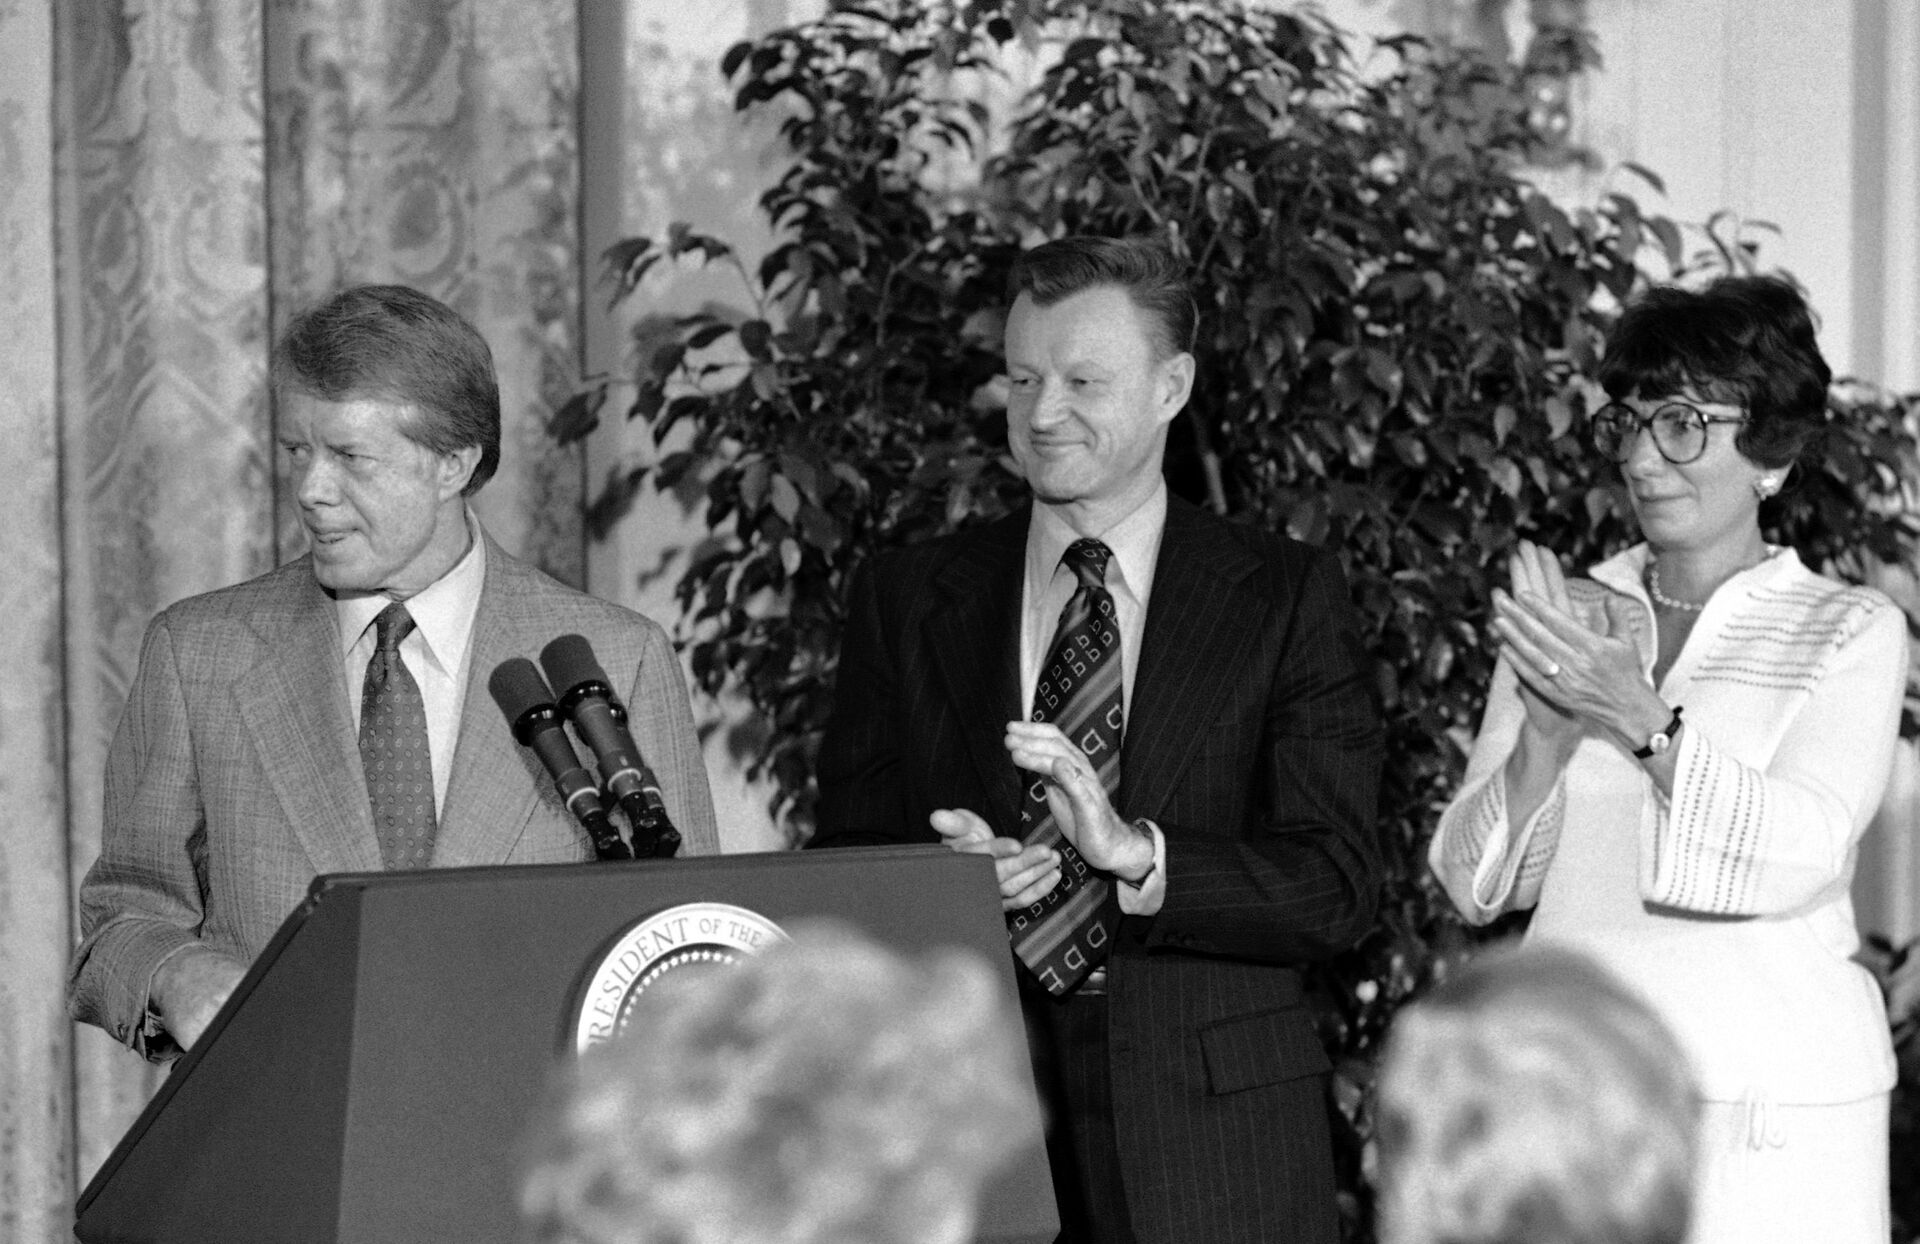 President Jimmy Carter, claiming success for his human rights policies, is applauded by aides Zbigniew Brzezinski and Anne Wexler in Washington, Dec. 6, 1978 - Sputnik International, 1920, 08.09.2021